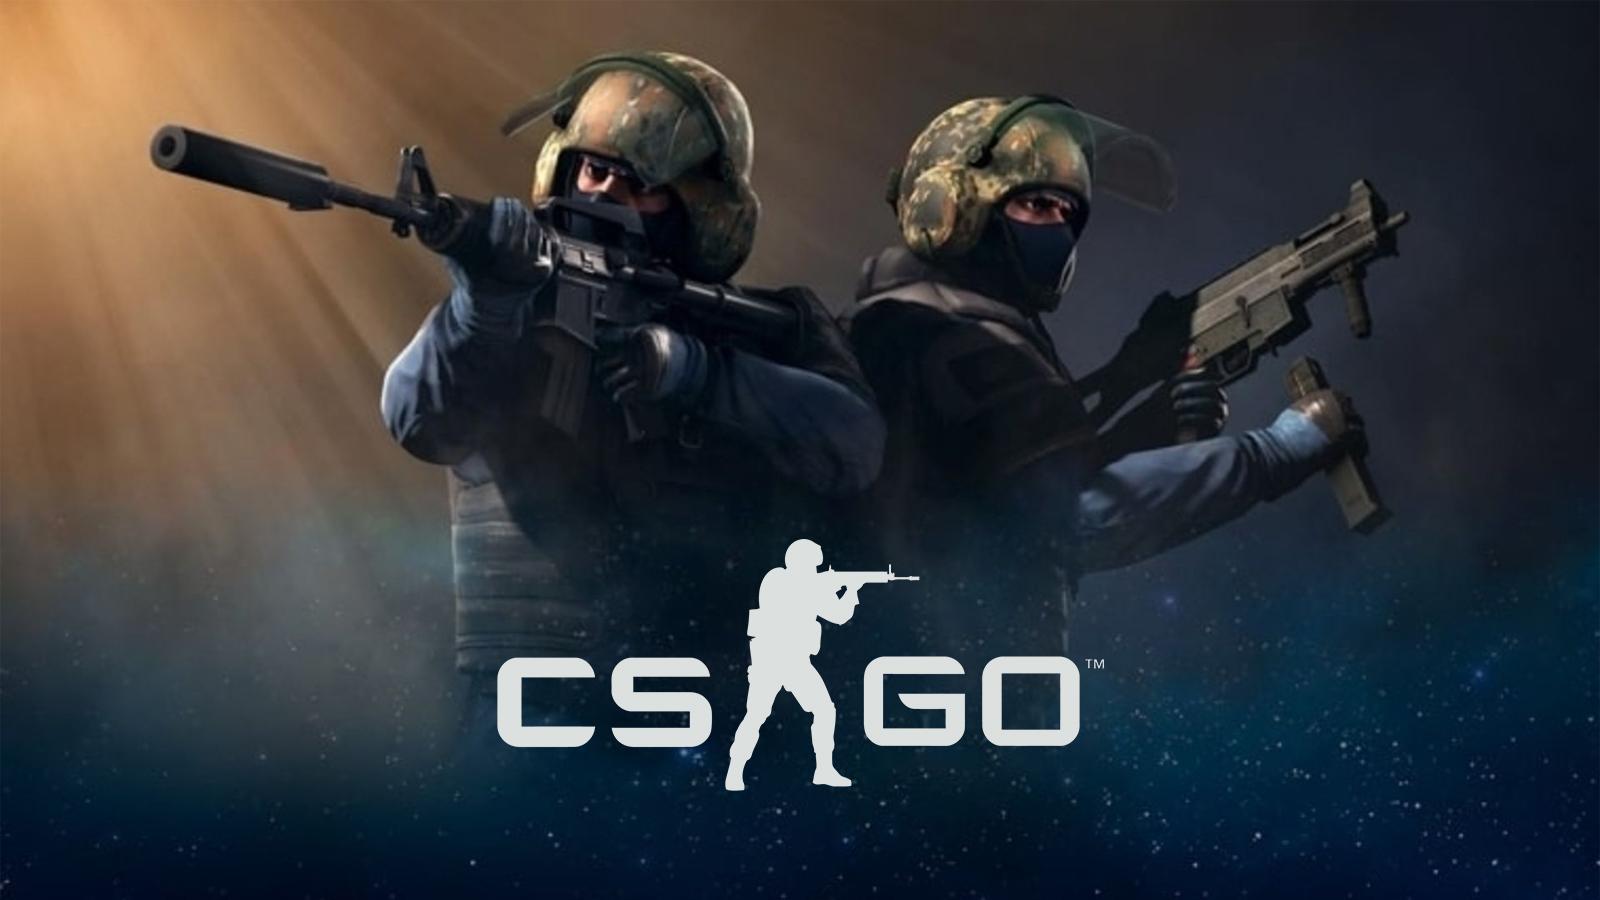 Valve insiders say a new Counter-Strike game is coming